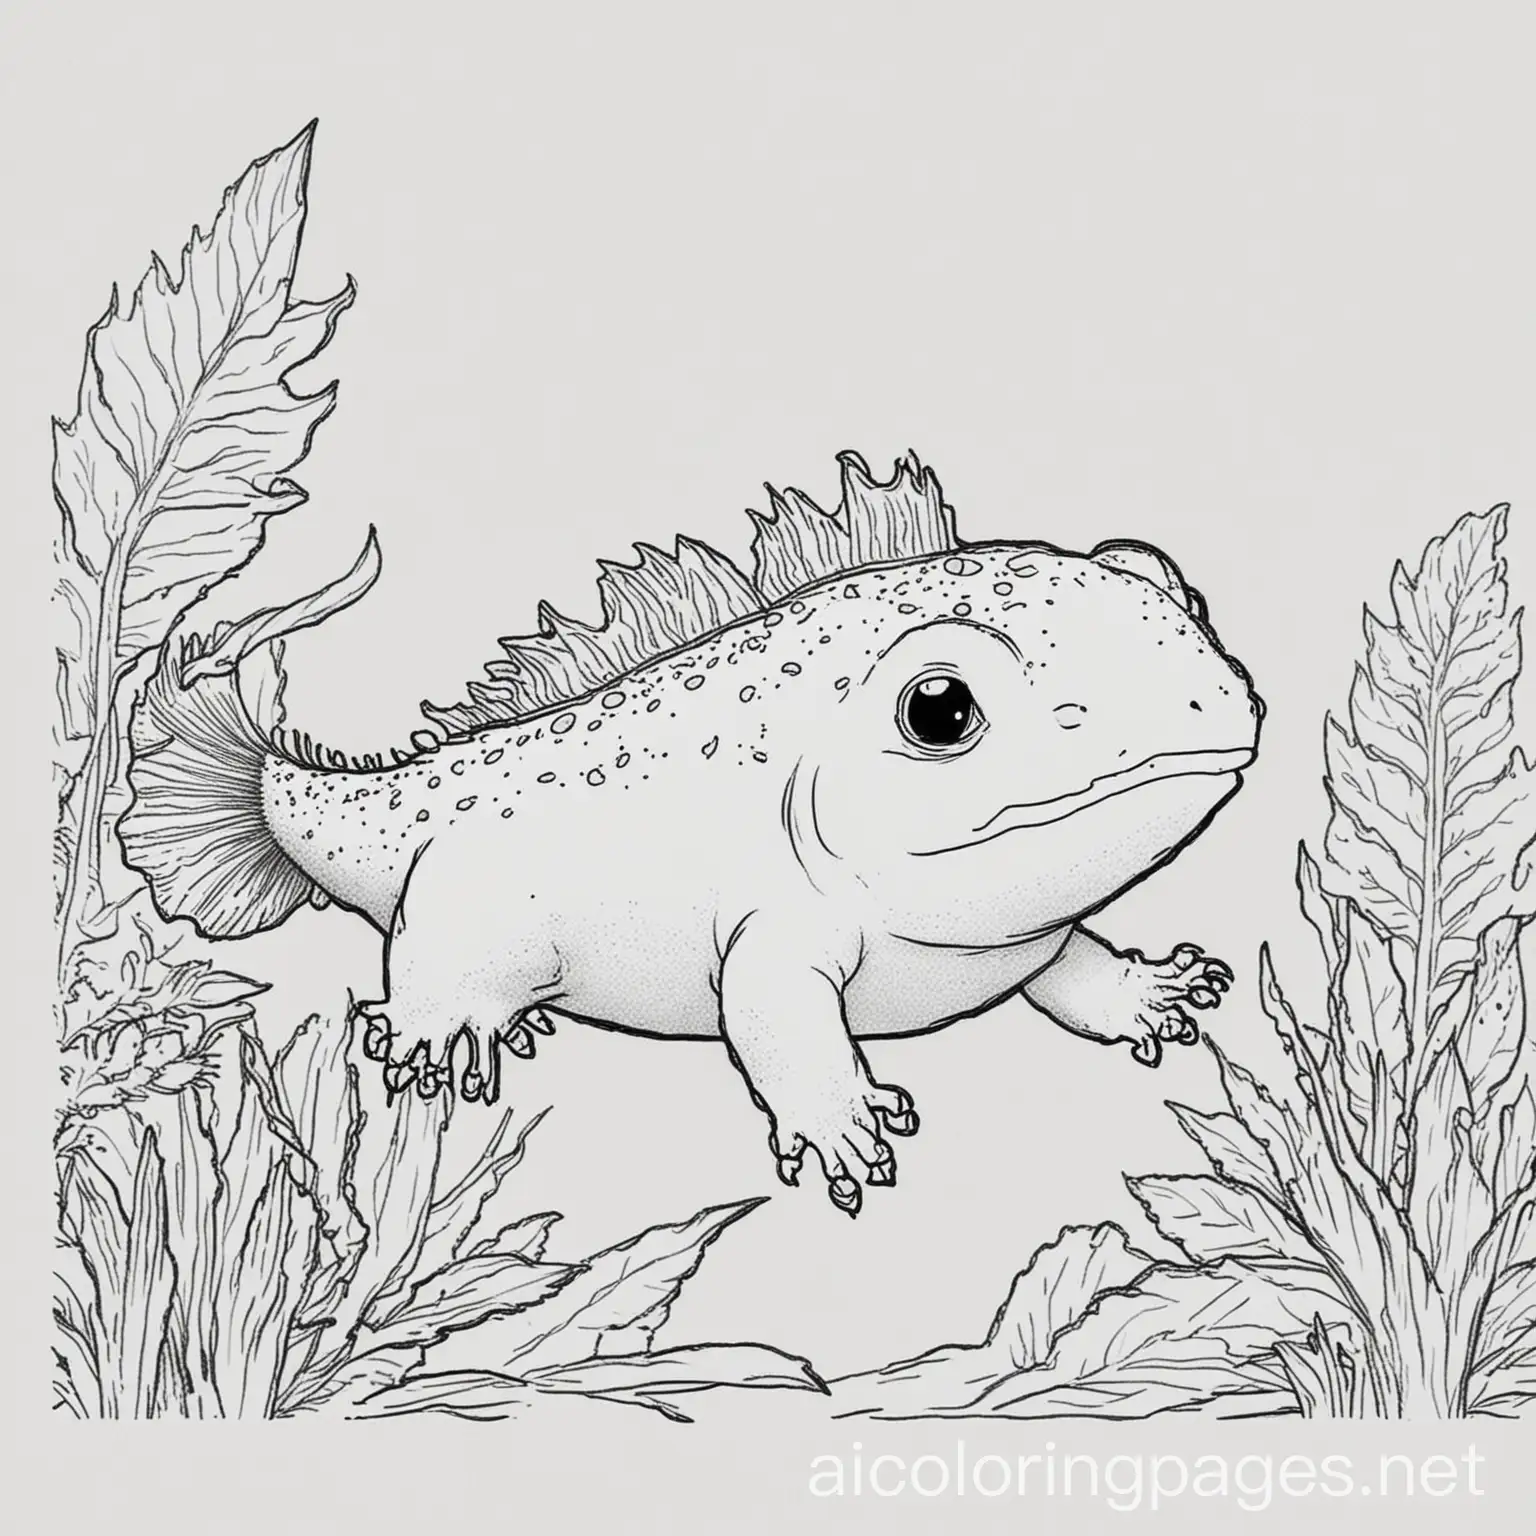 axolotl
, Coloring Page, black and white, line art, white background, Simplicity, Ample White Space. The background of the coloring page is plain white to make it easy for young children to color within the lines. The outlines of all the subjects are easy to distinguish, making it simple for kids to color without too much difficulty